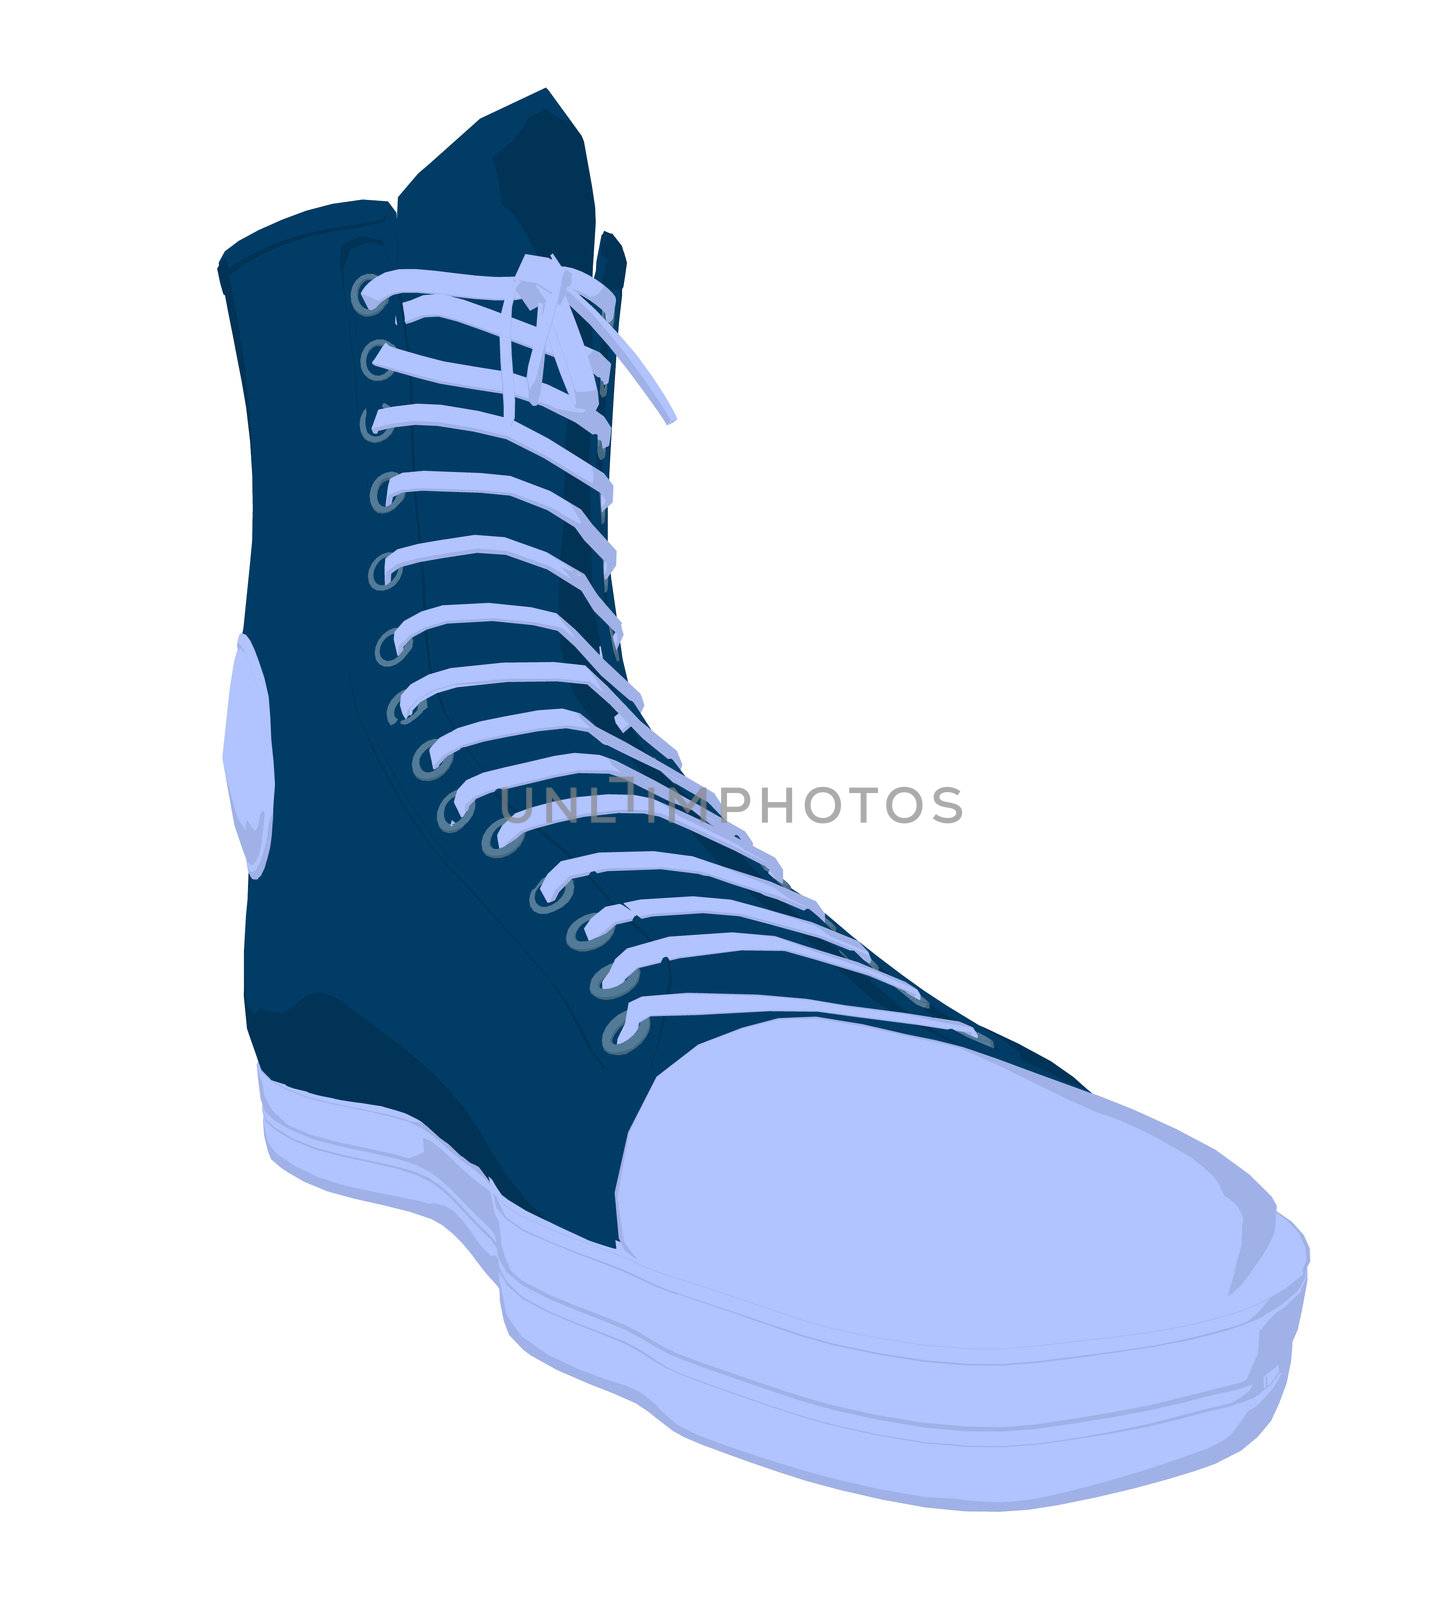 Basketball Sneakers Illustration by kathygold